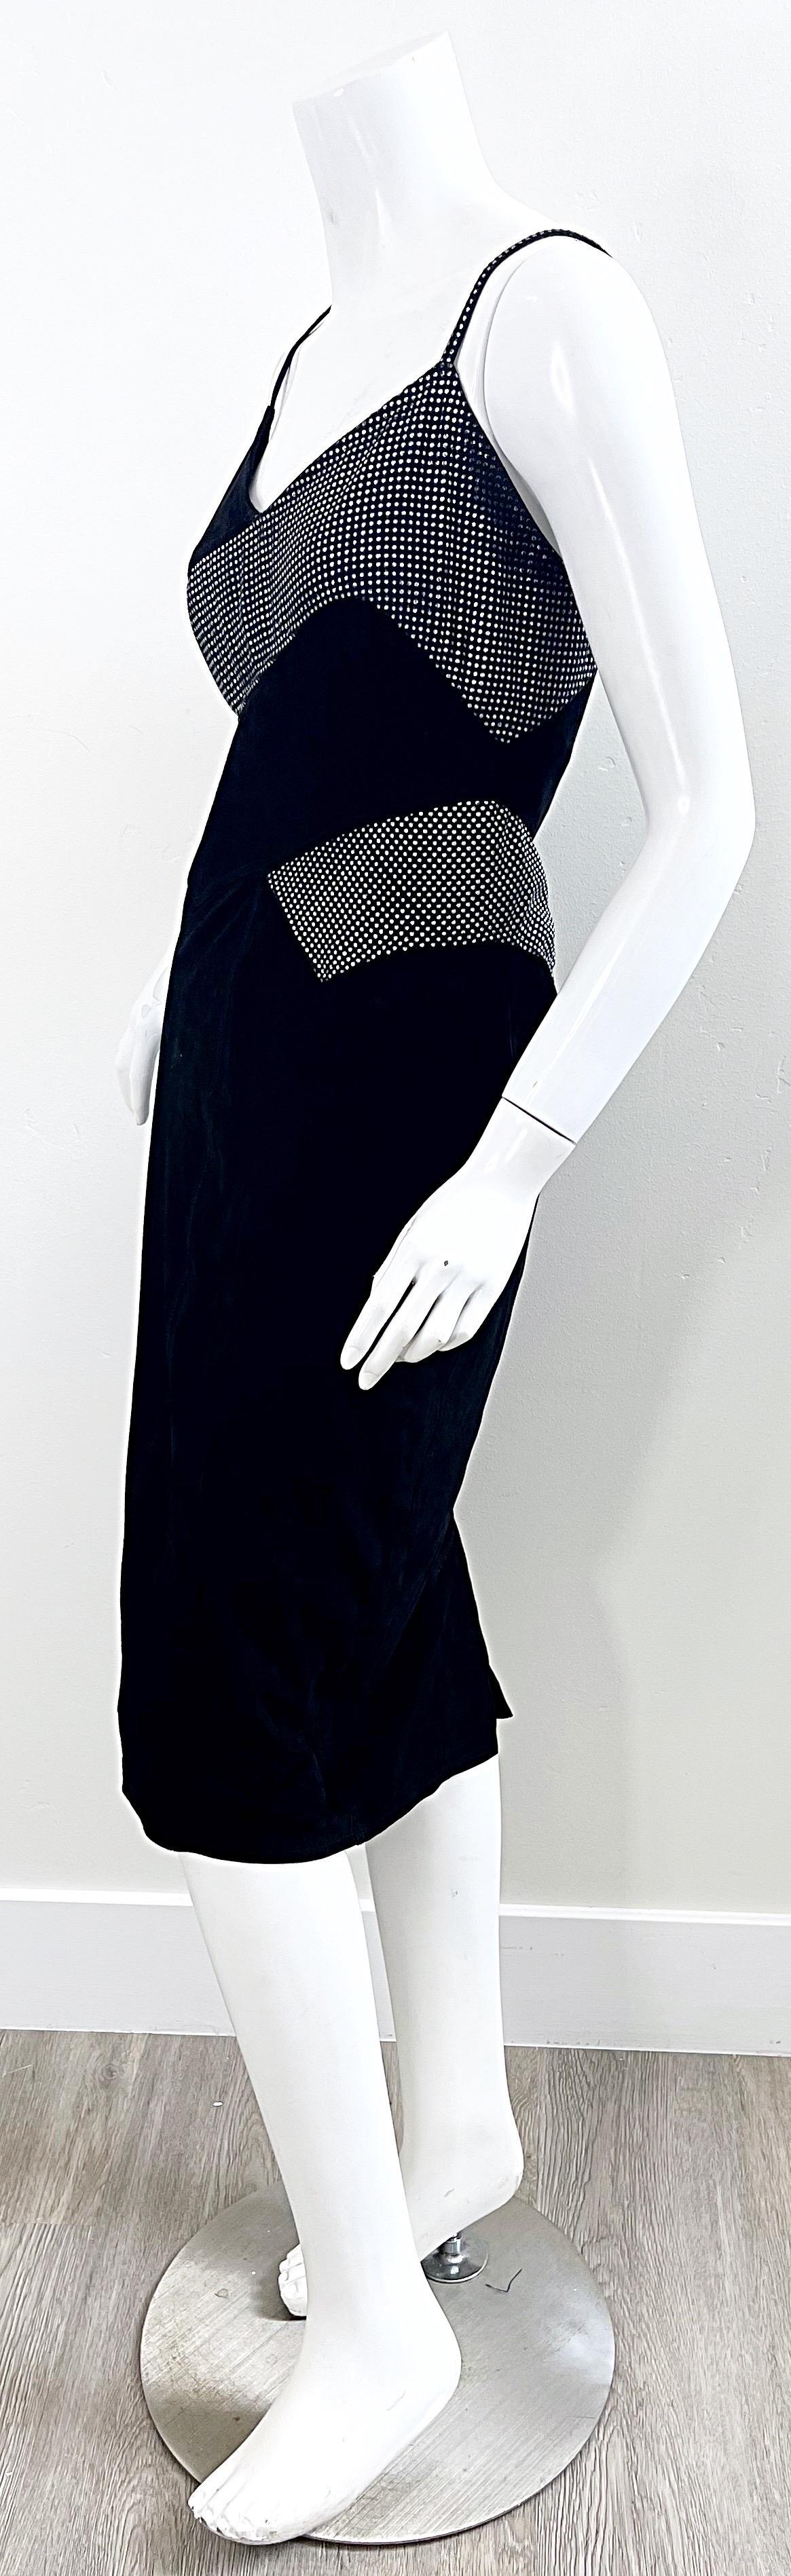 Fendi 1980s Fendissime Black Silver Suede Leather Vintage 80s Hand Painted Dress For Sale 5